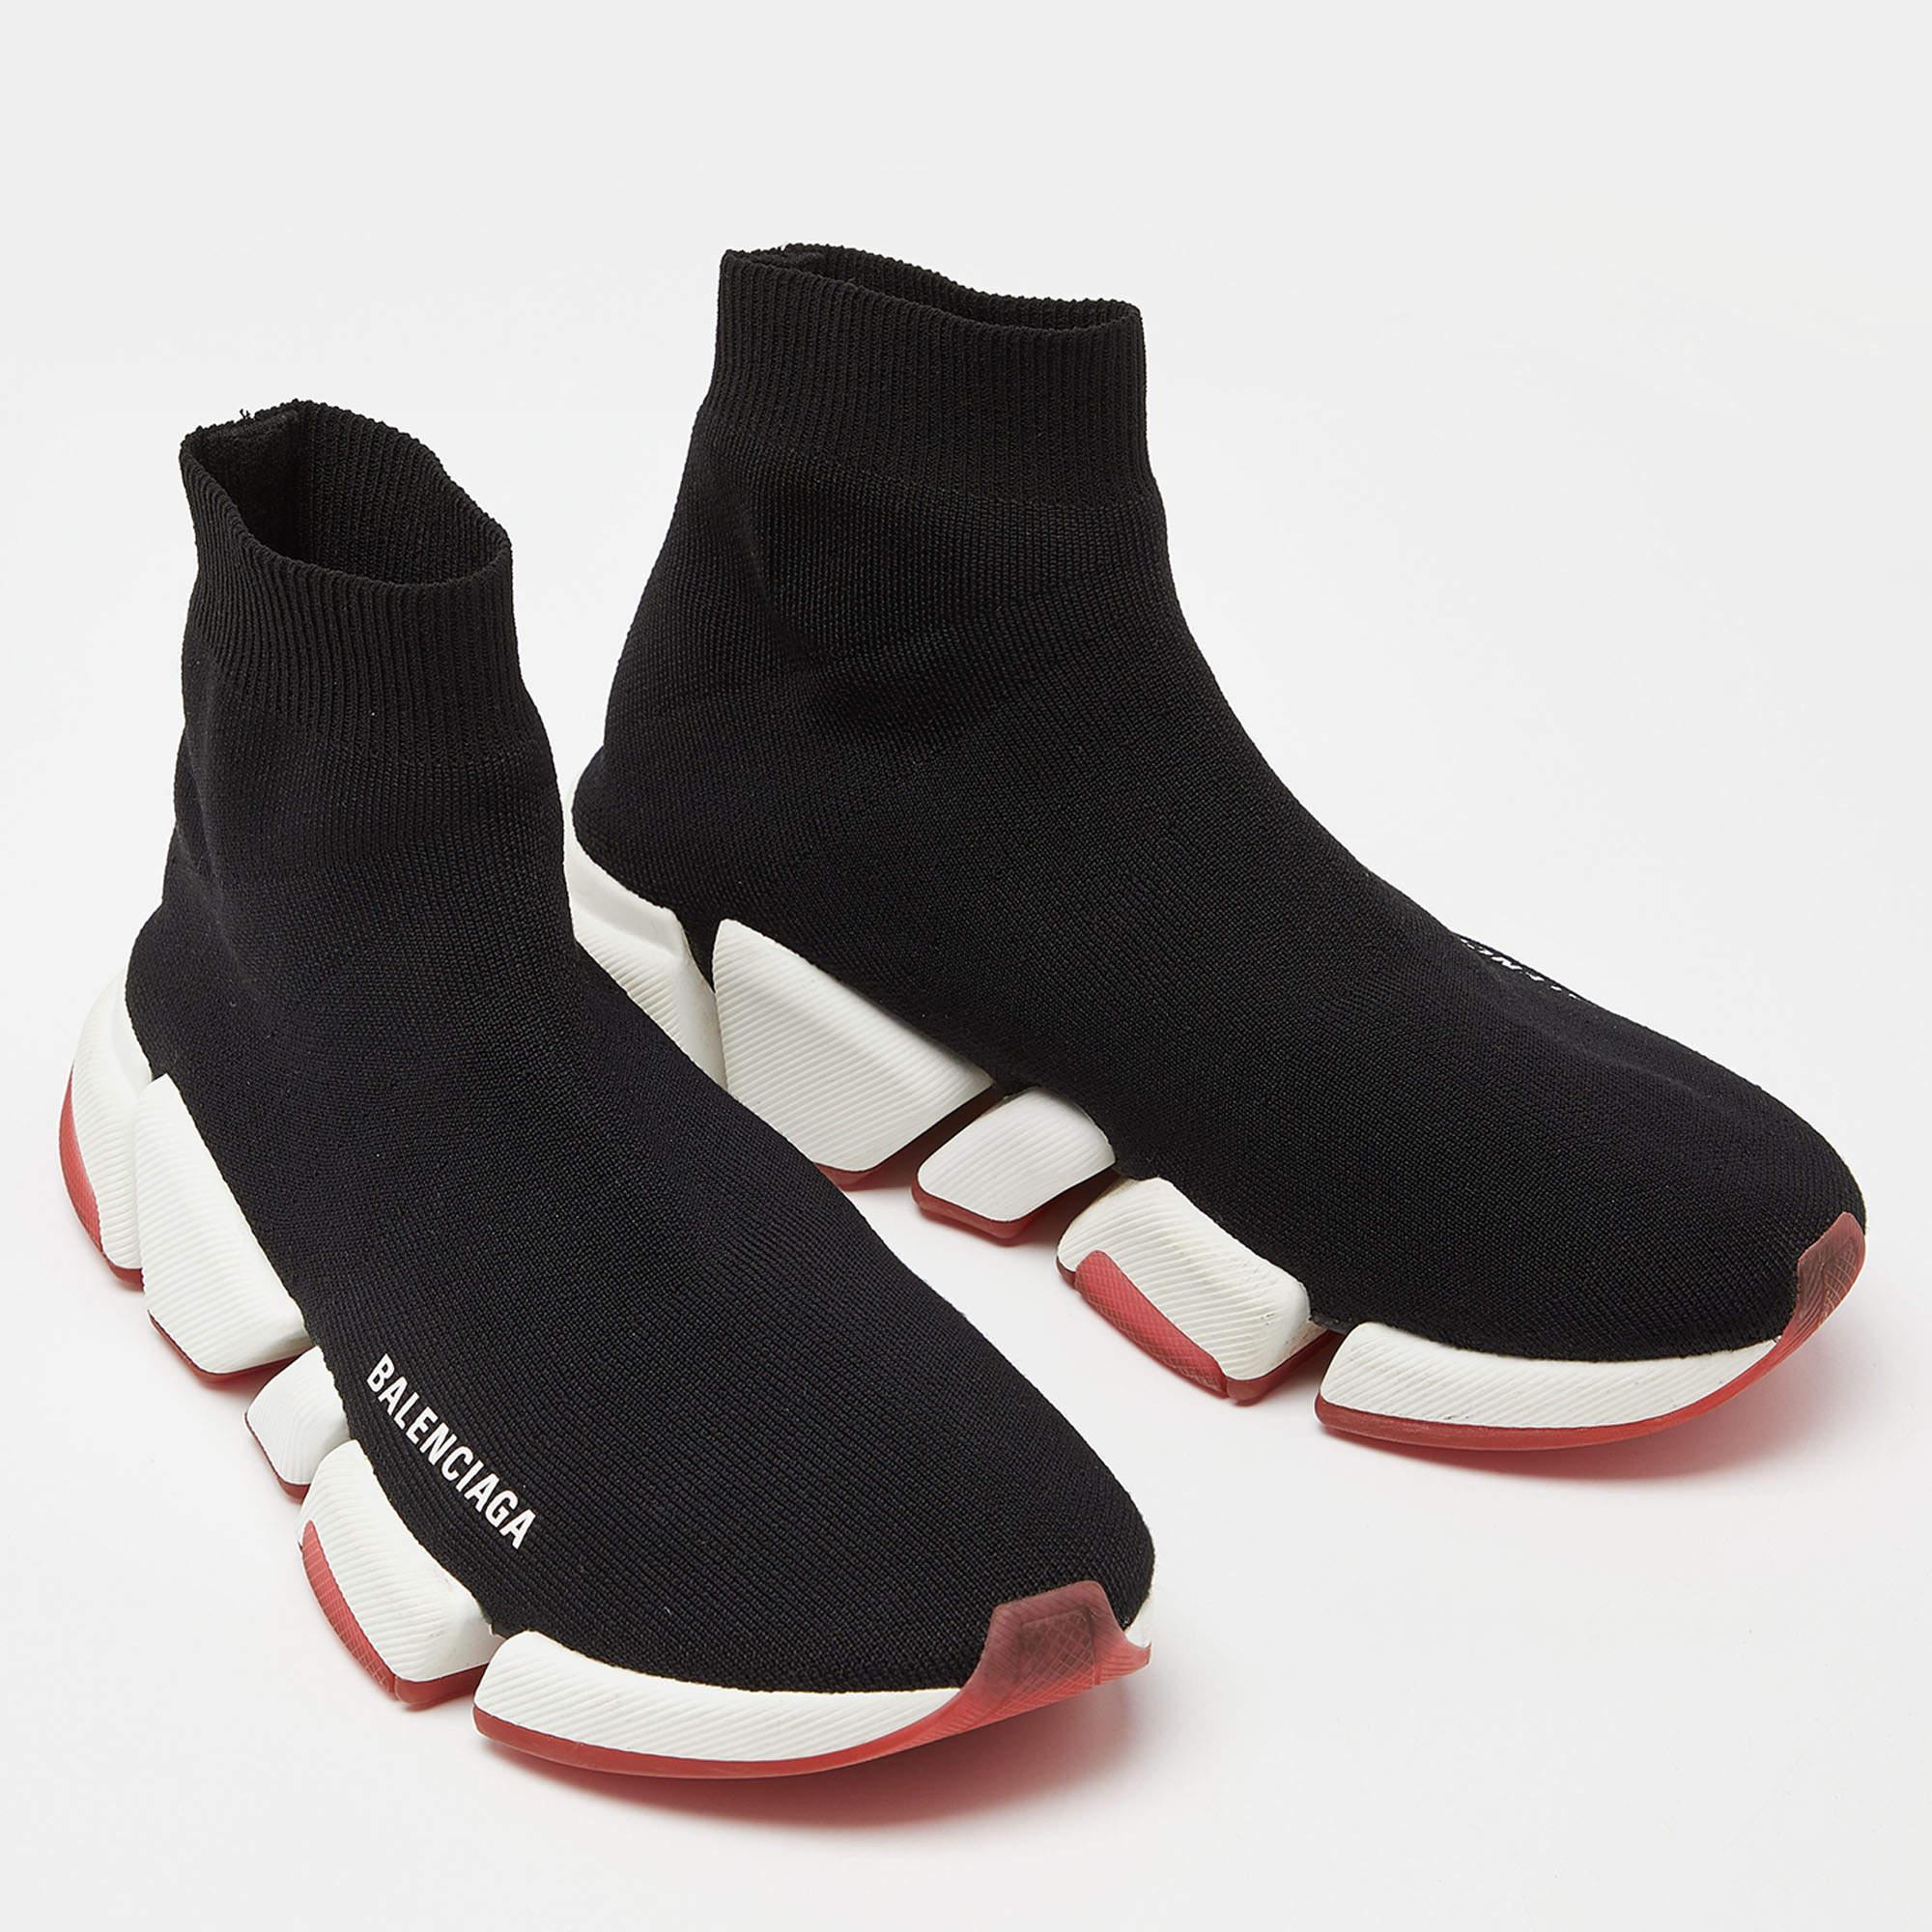 Balenciaga Black Knit Fabric Speed Trainer Sneakers Size 38 For Sale 2